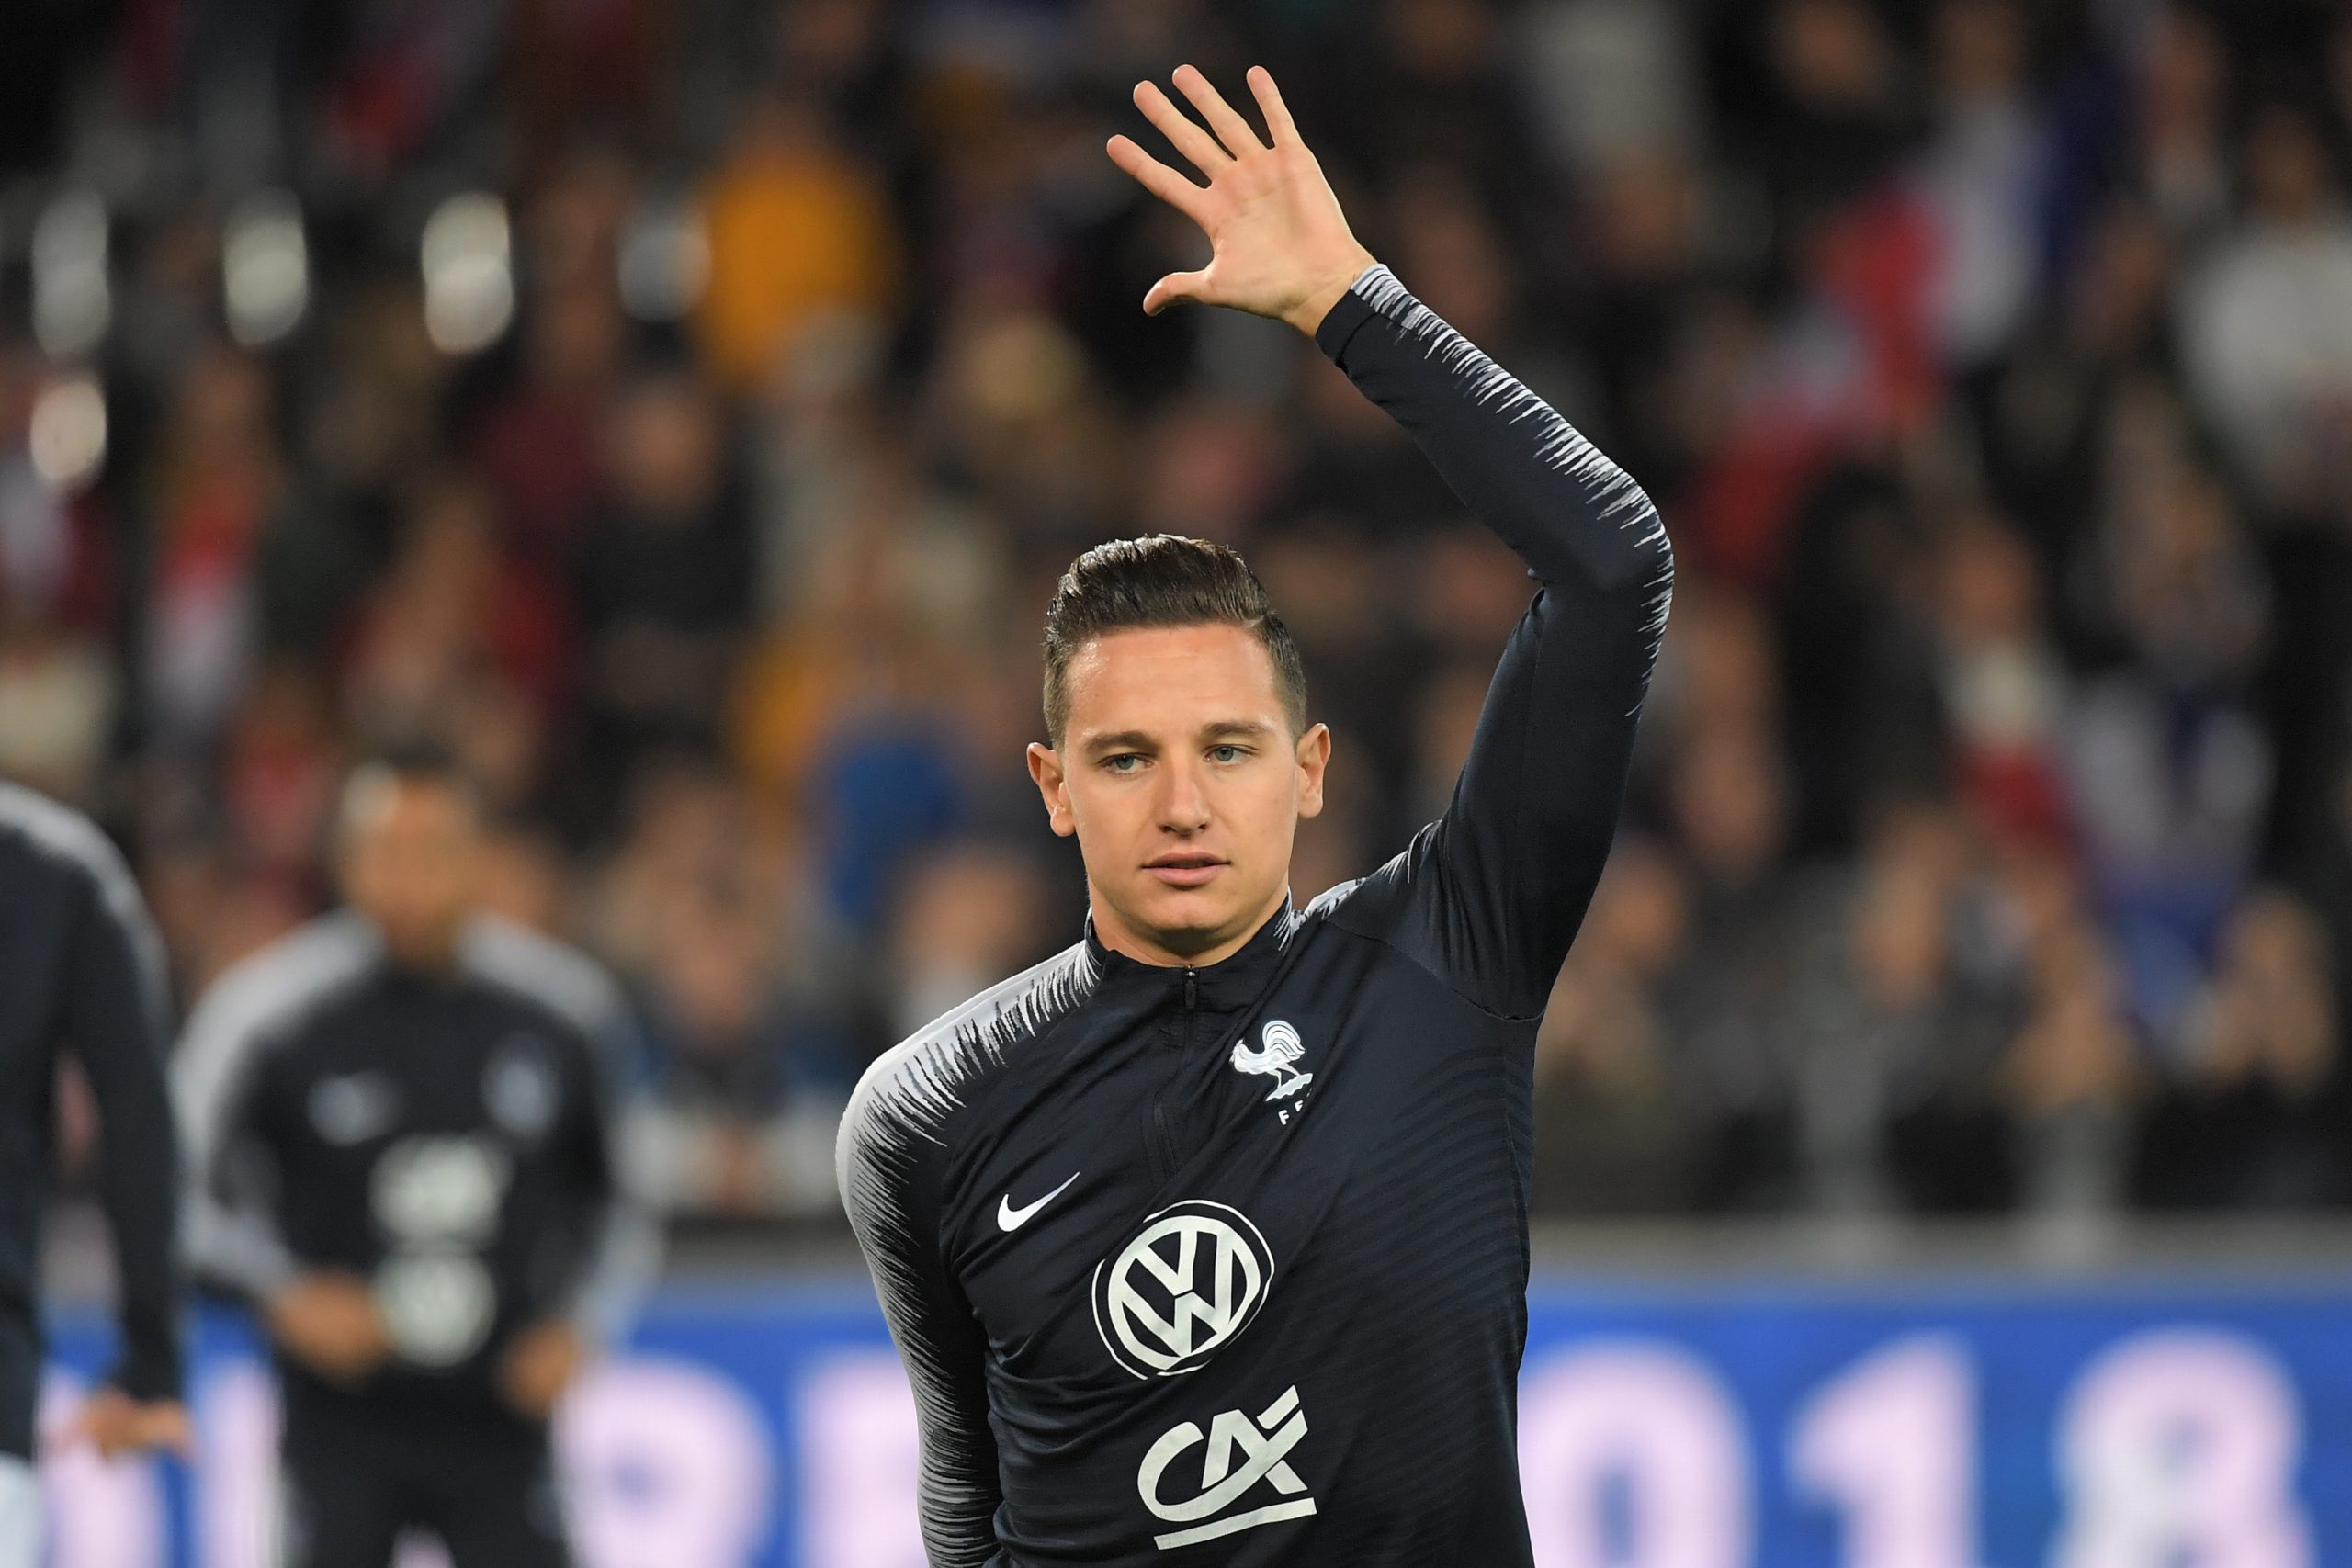 Florain Thauvin was part of the French World Cup-winning squad in 2018 (Getty Images)